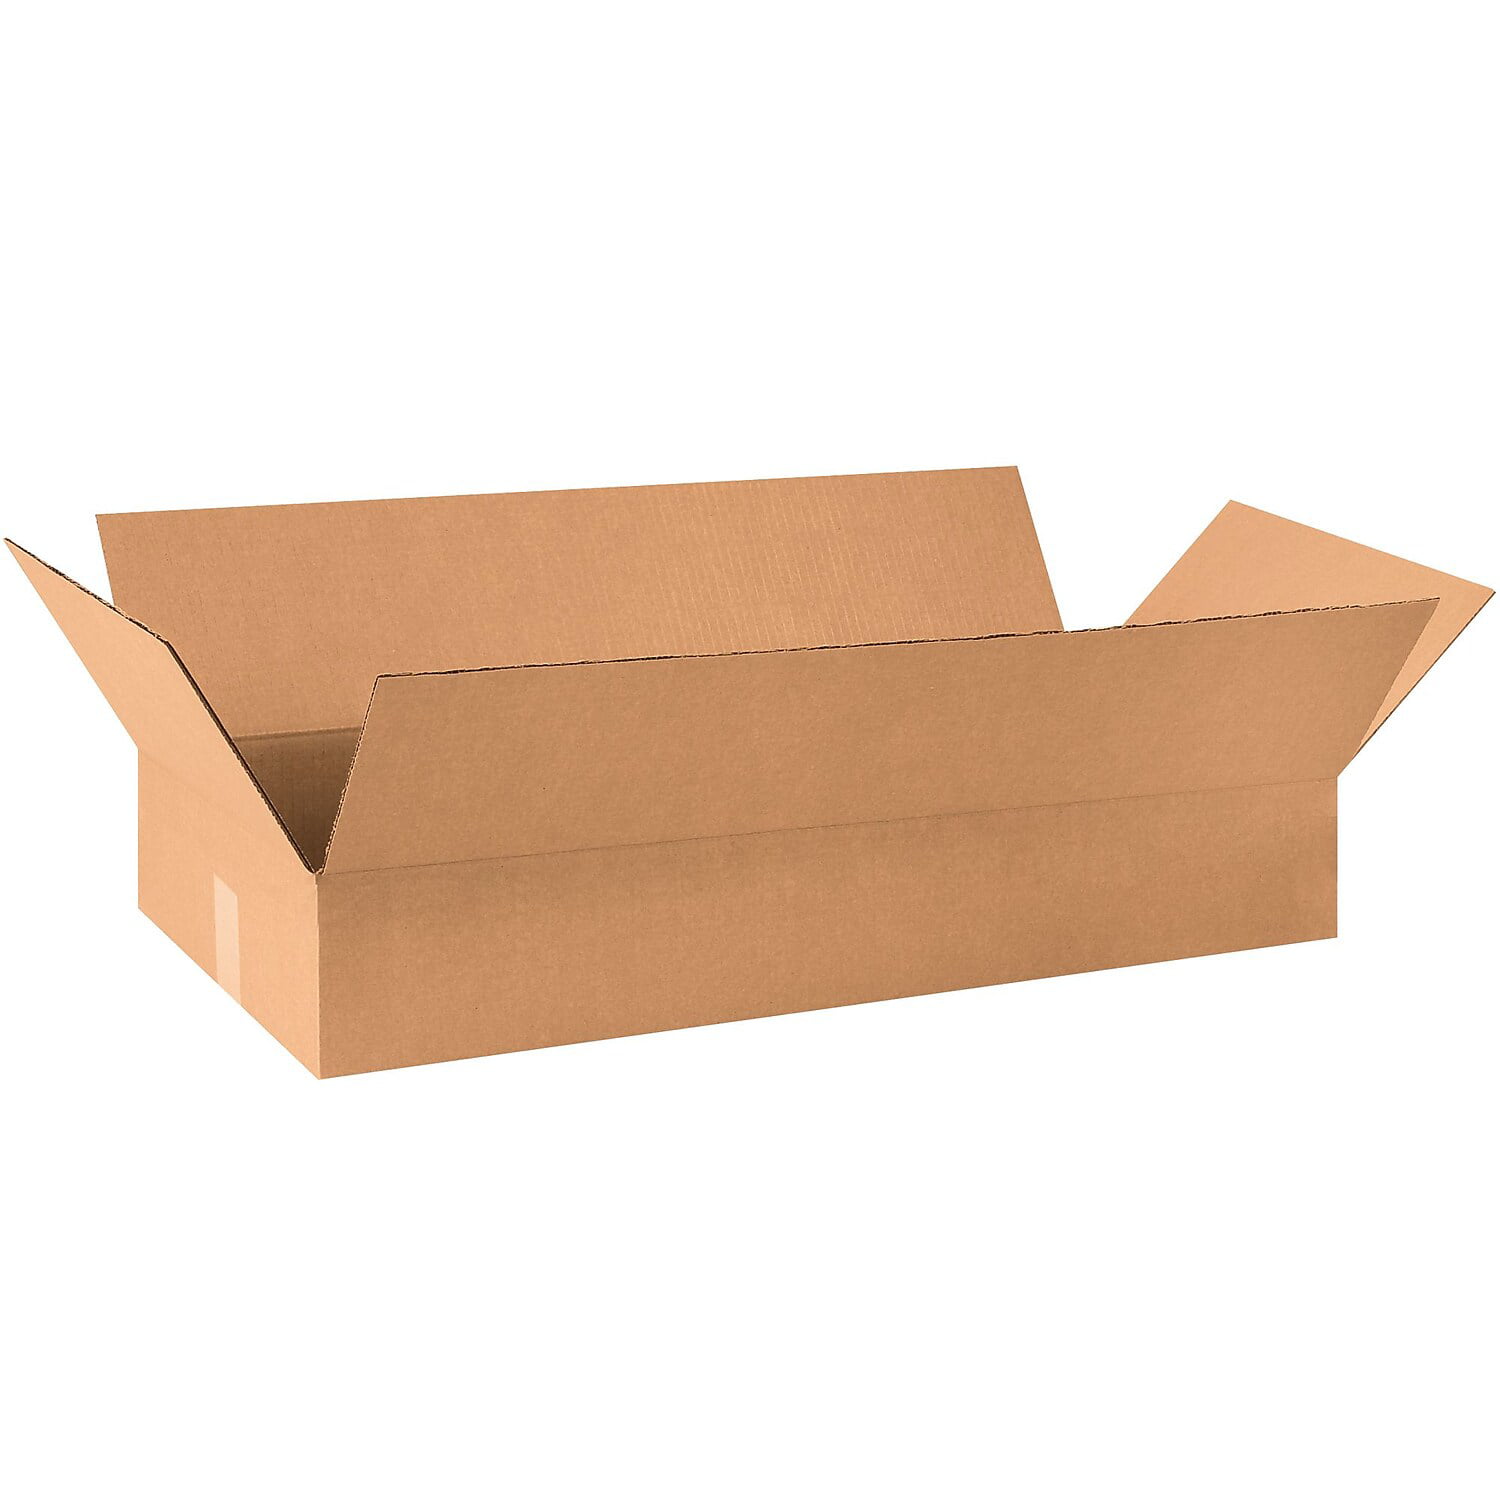 12 x 12 x 4 12 Width 12 Length Pack of 25 BOX USA BMD12124 Multi Depth Corrugated Boxes 4 Height Kraft